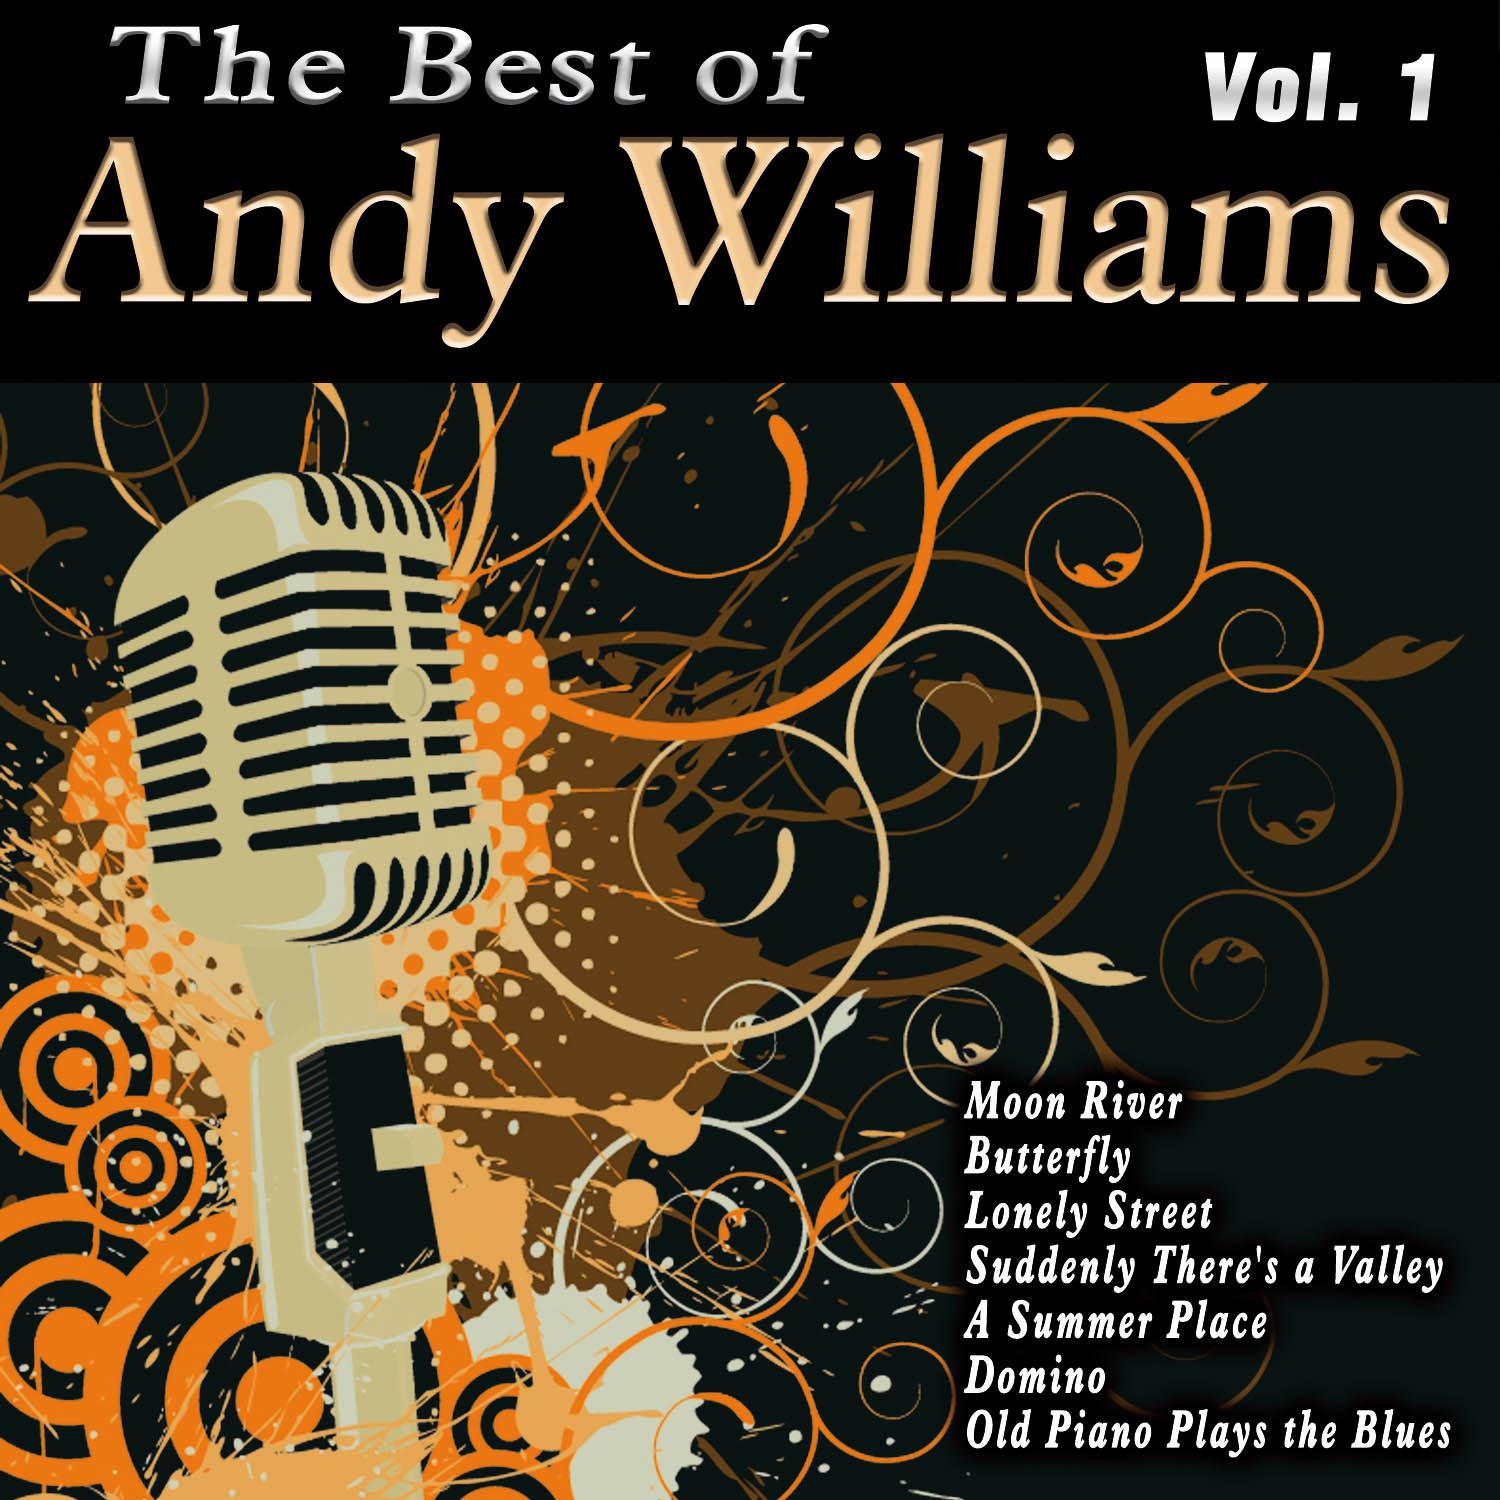 The Best of Andy Williams Vol. 1